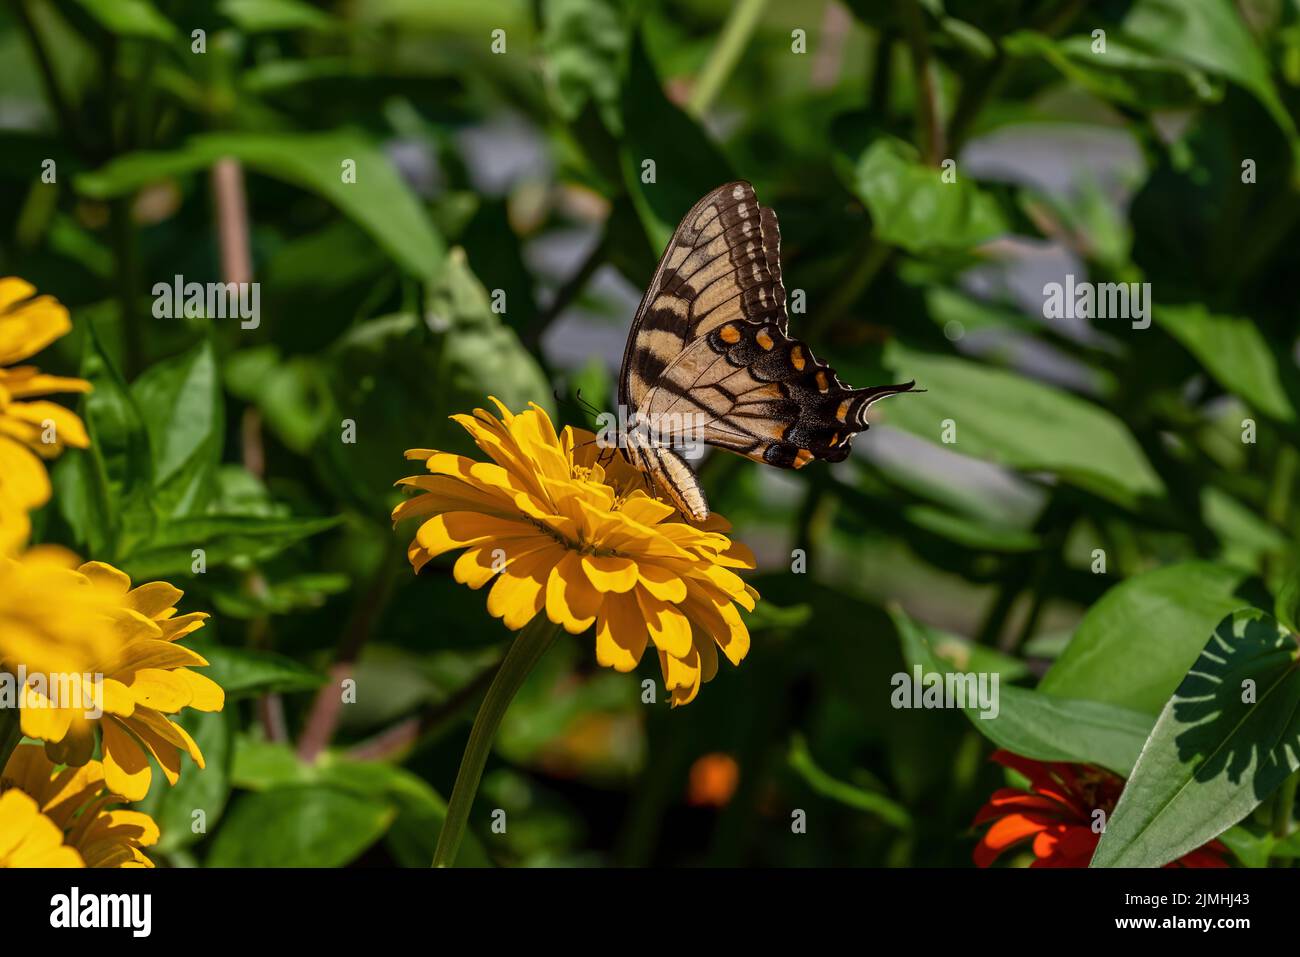 Eastern Tiger Swallowtail butterfly on Zinnia flowers. The Swallowtail soars high in trees and flutter in pursuit of nectar in gardens Stock Photo